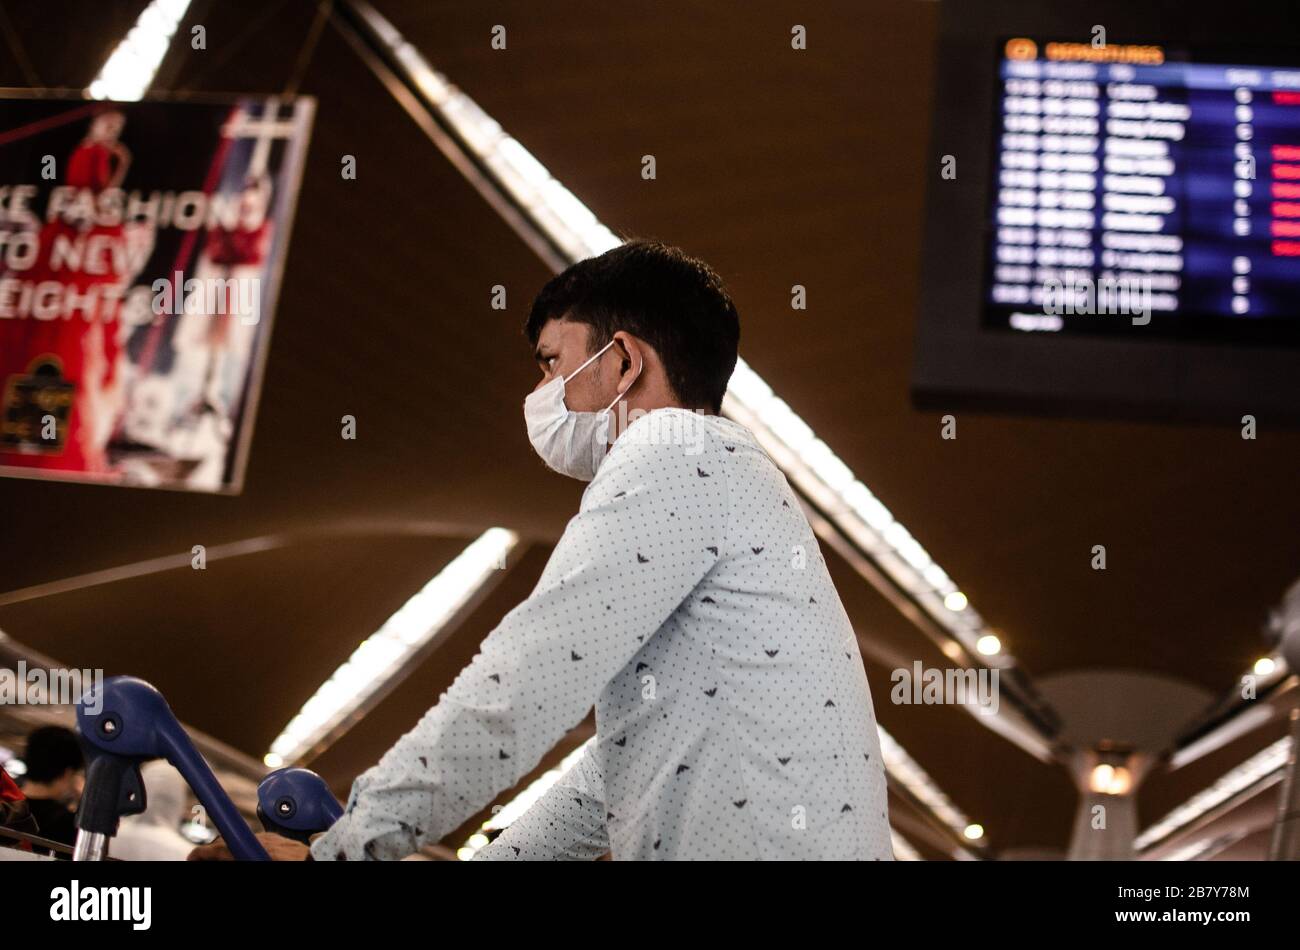 Kuala Lumpur, Malaysia - 18. March 2020: Travelers wearing face mask during COVID-19 pandemic at the international airport. Stock Photo